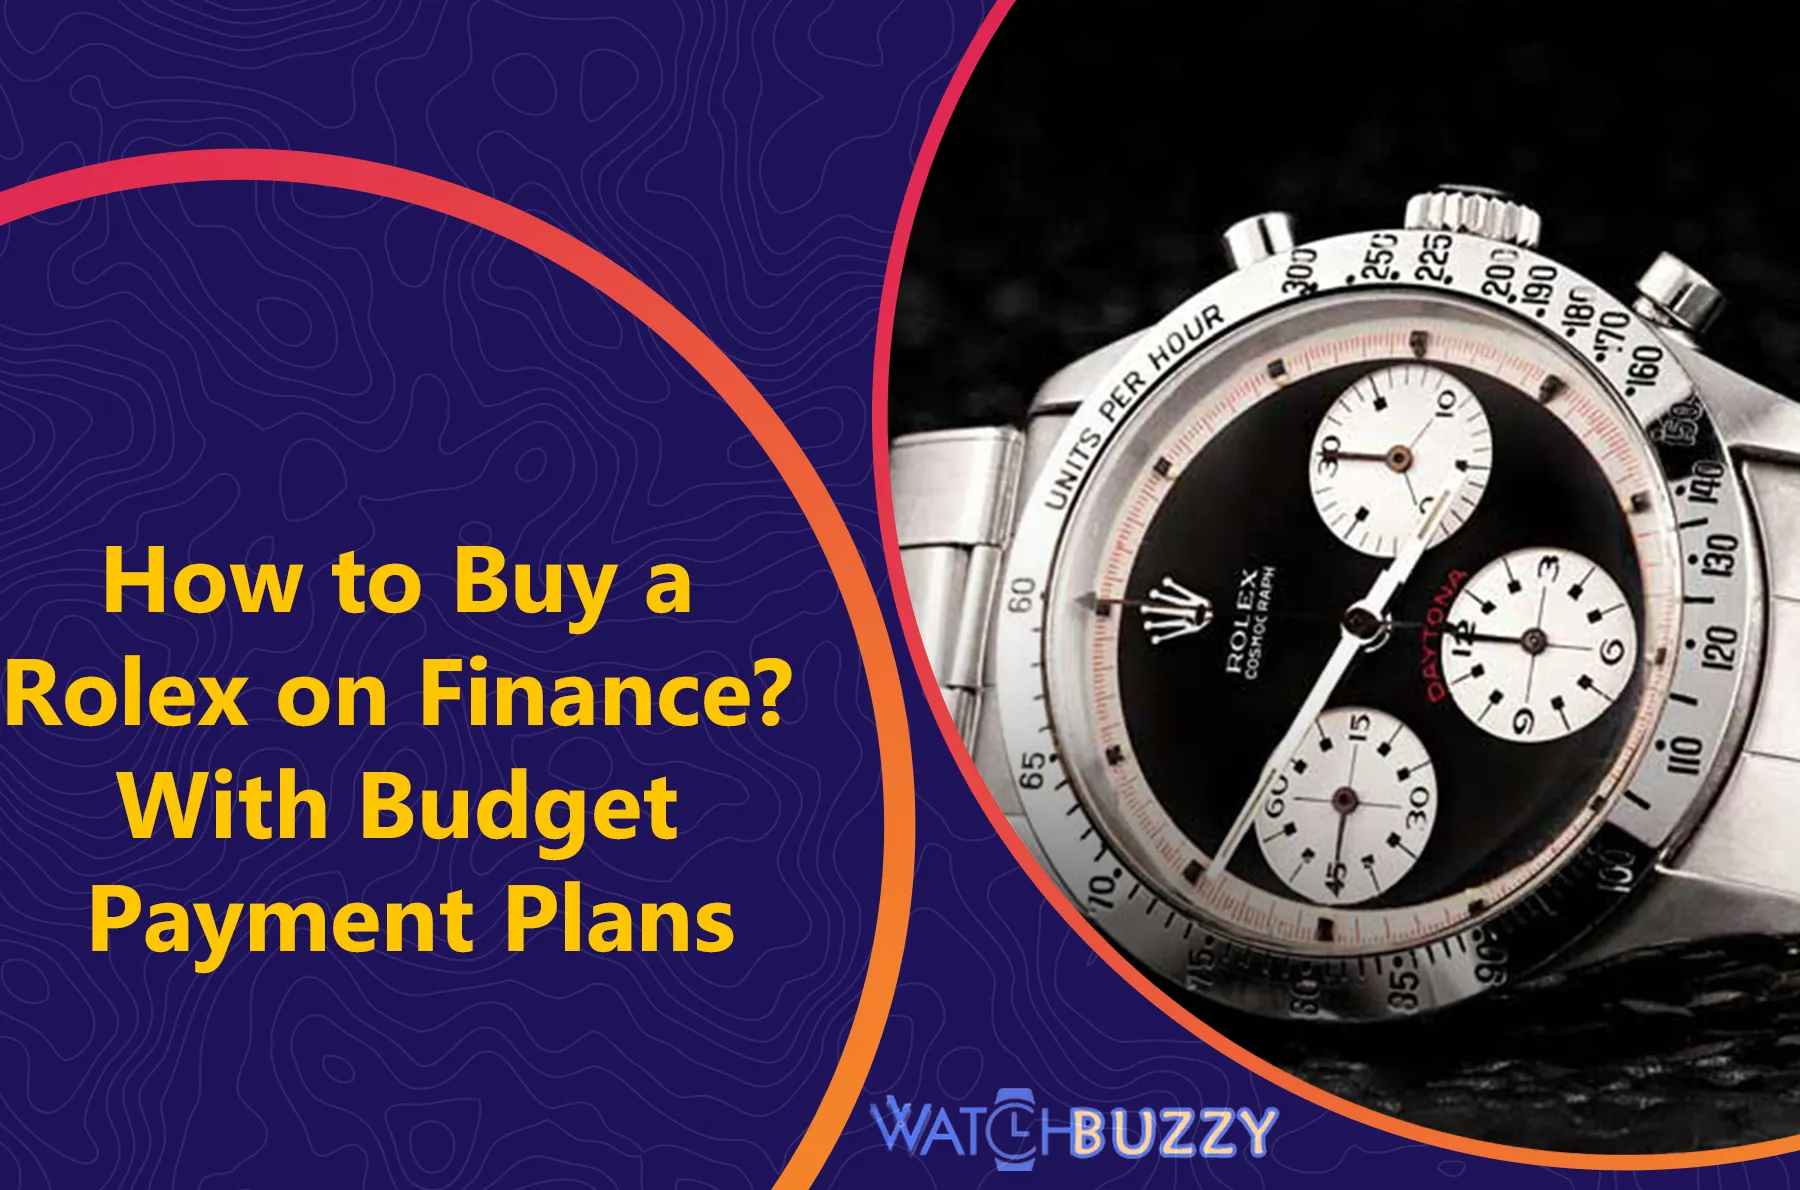 How to Buy a Rolex on Finance? With Budget Payment Plans